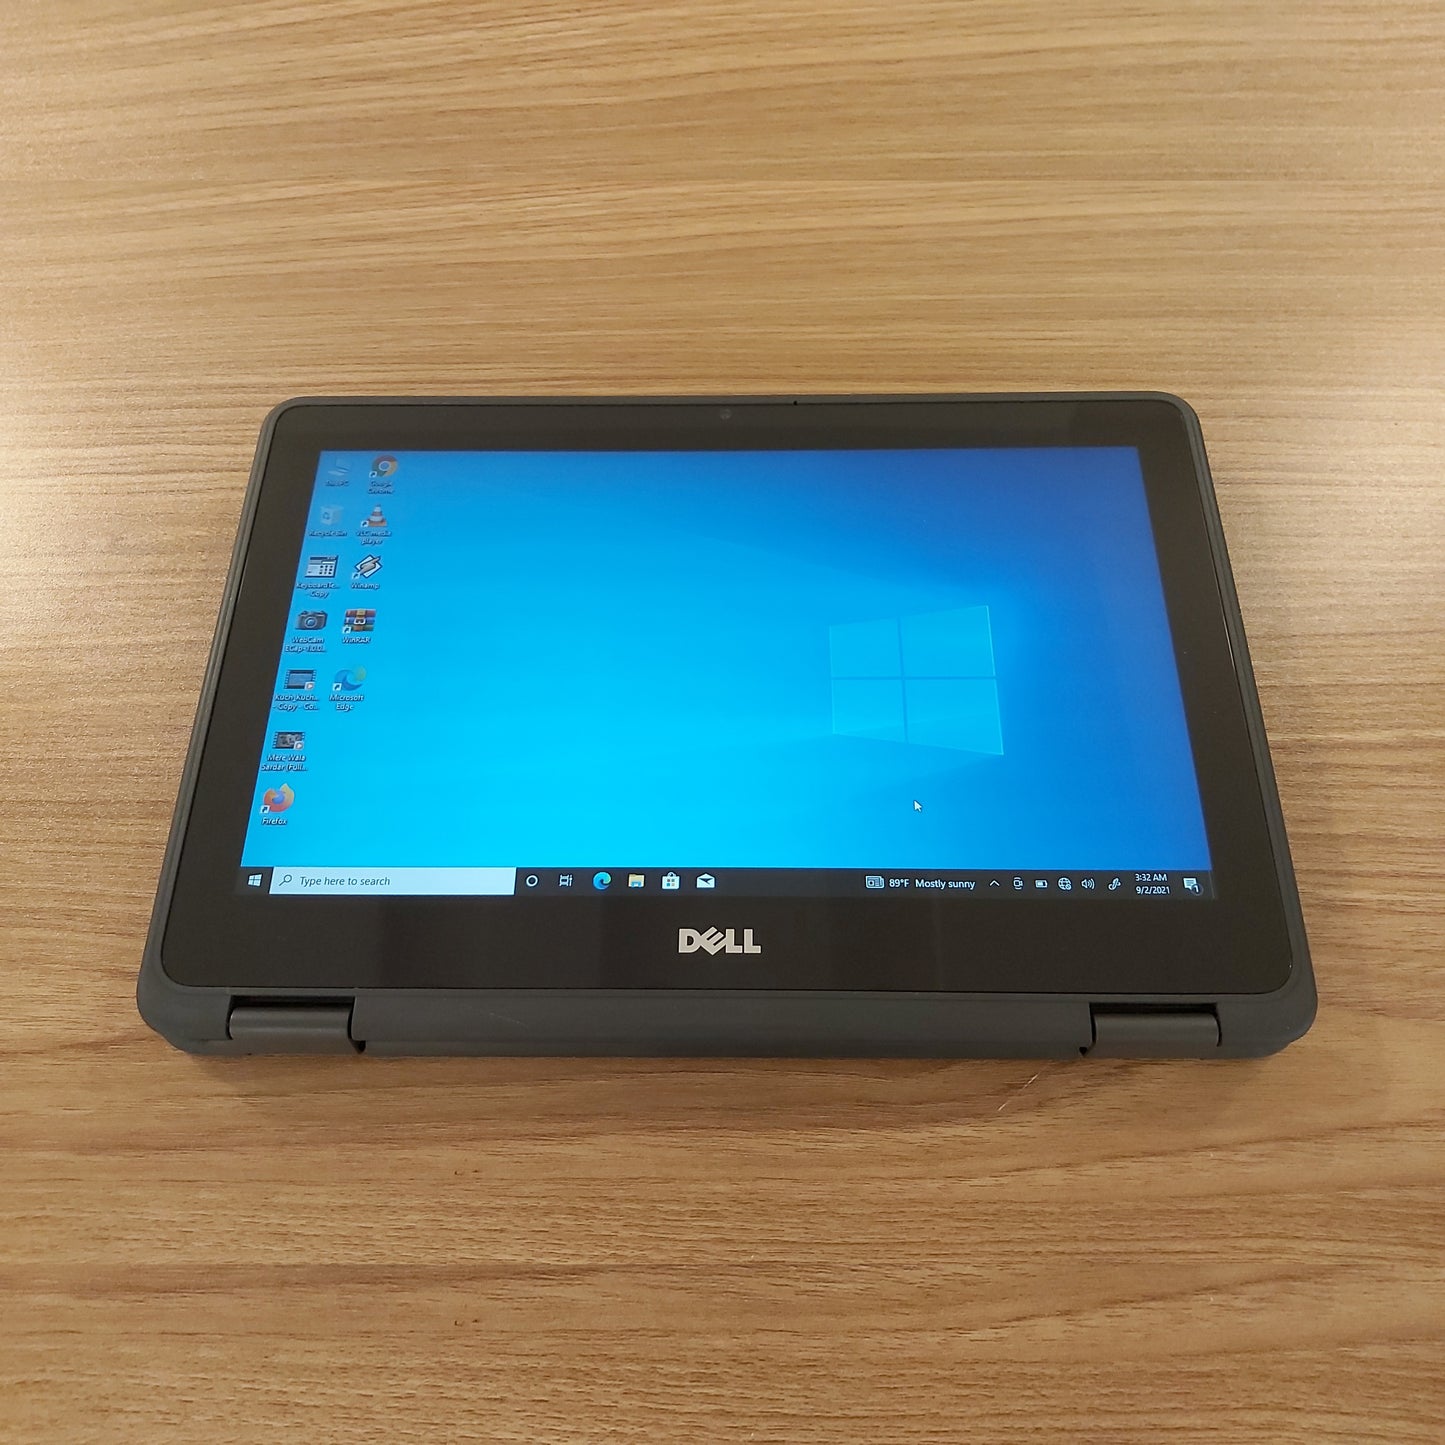 Dell 2in1 Latitude 3189 Laptop (Slightly Used)